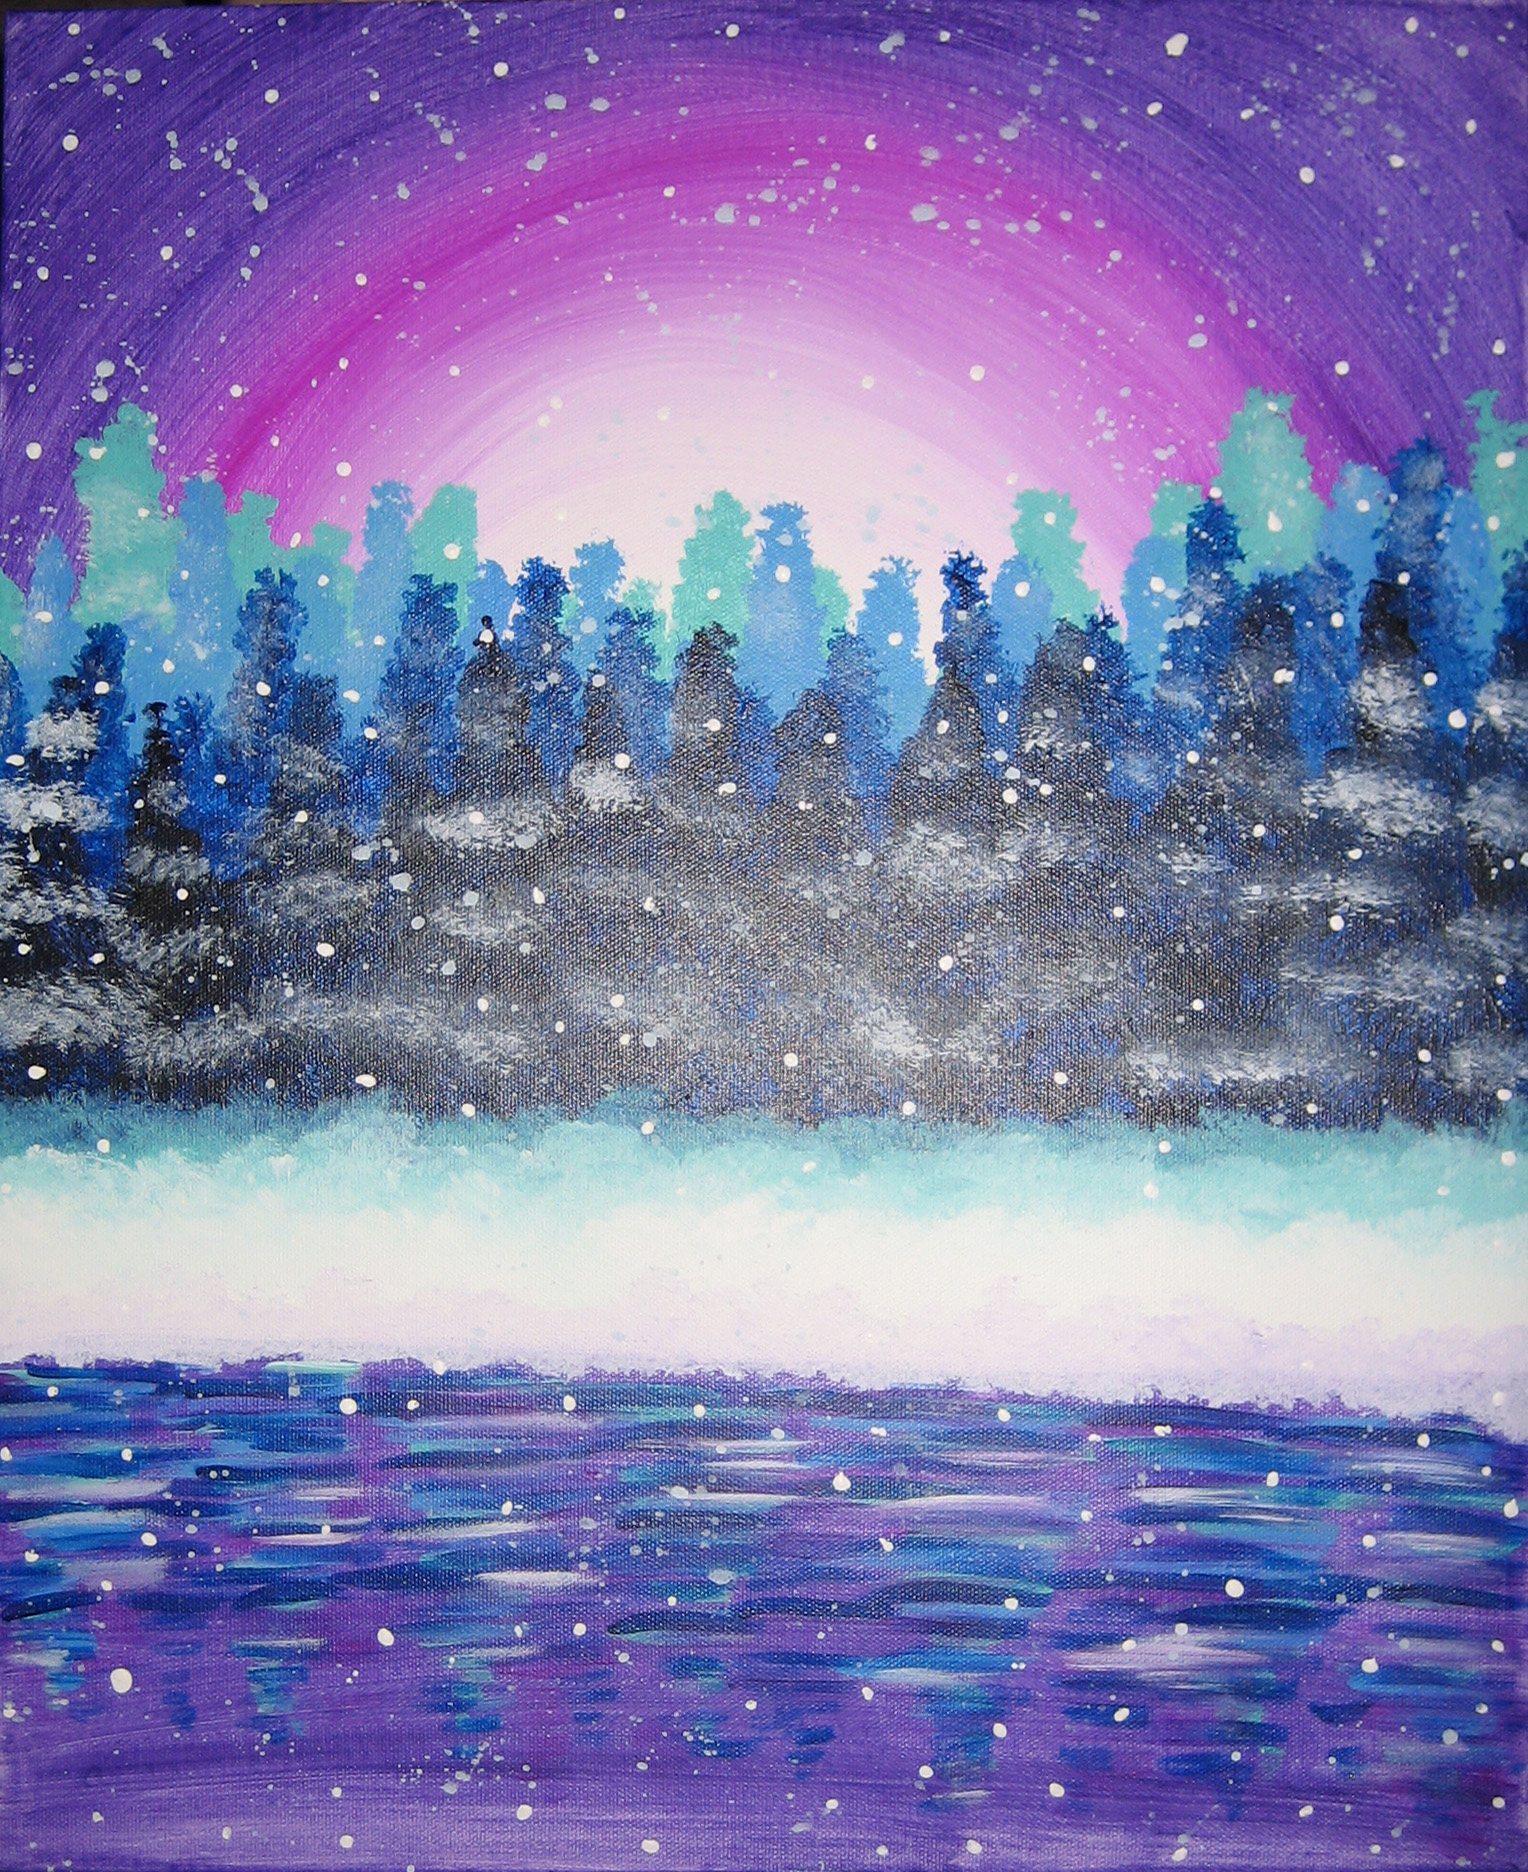 Tranquil Snowfall - Pinot's Palette Painting